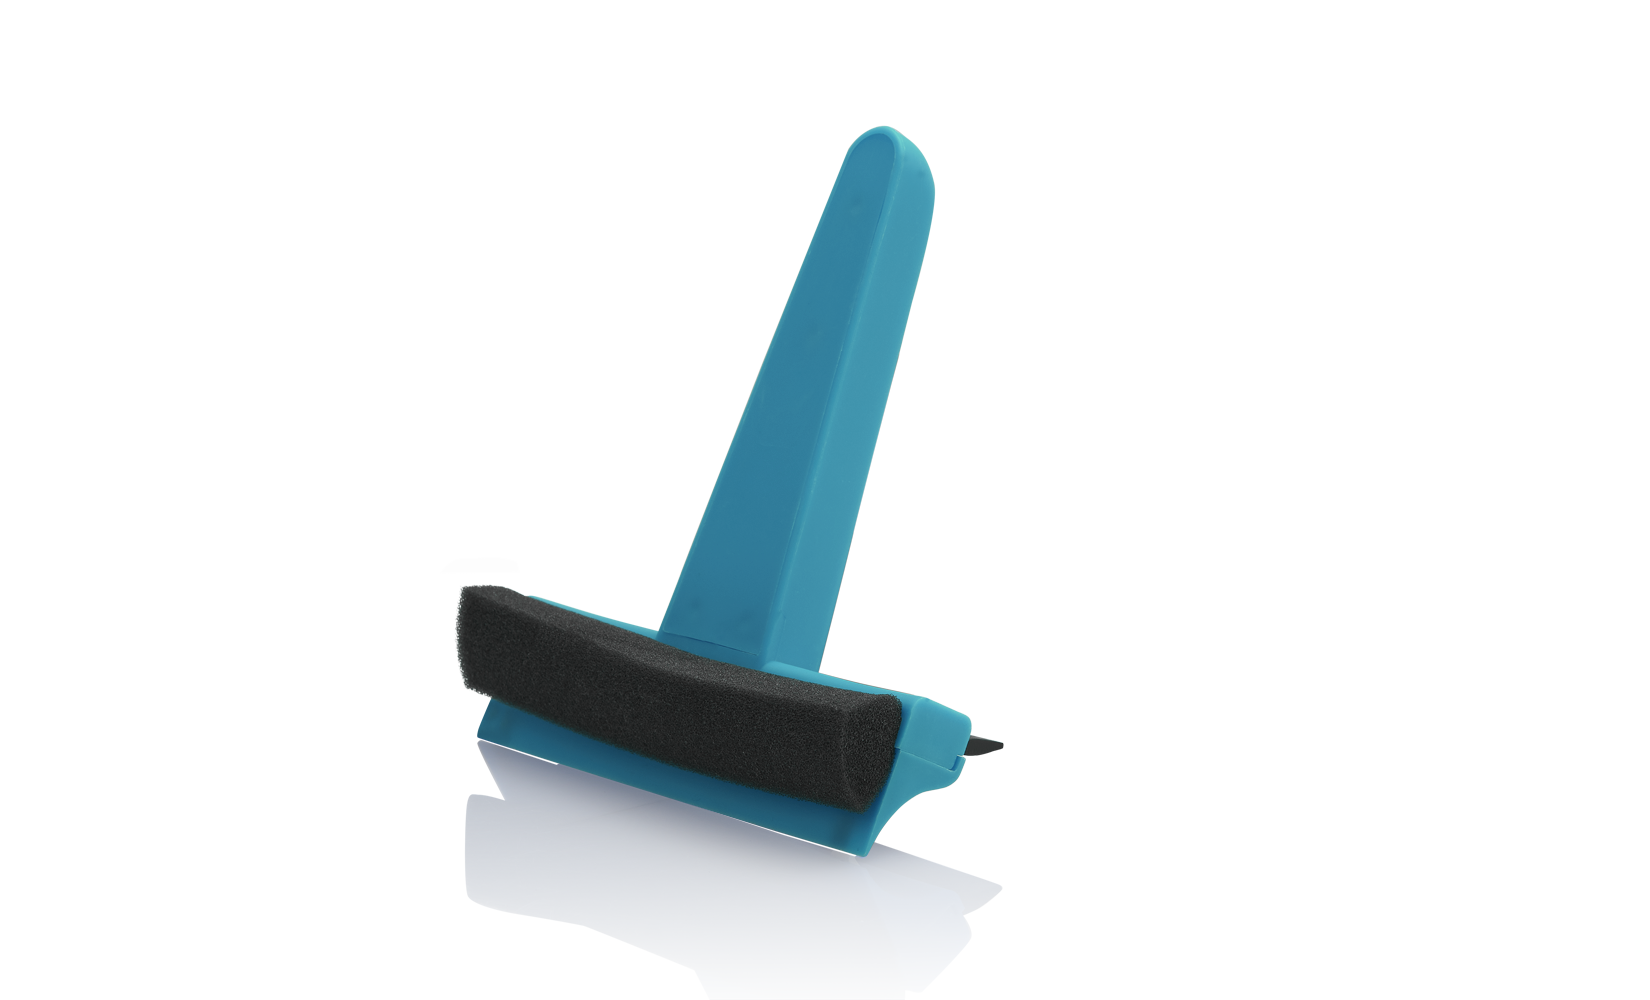 Ice Scraper 3 in 1 with Squeegee and Foam